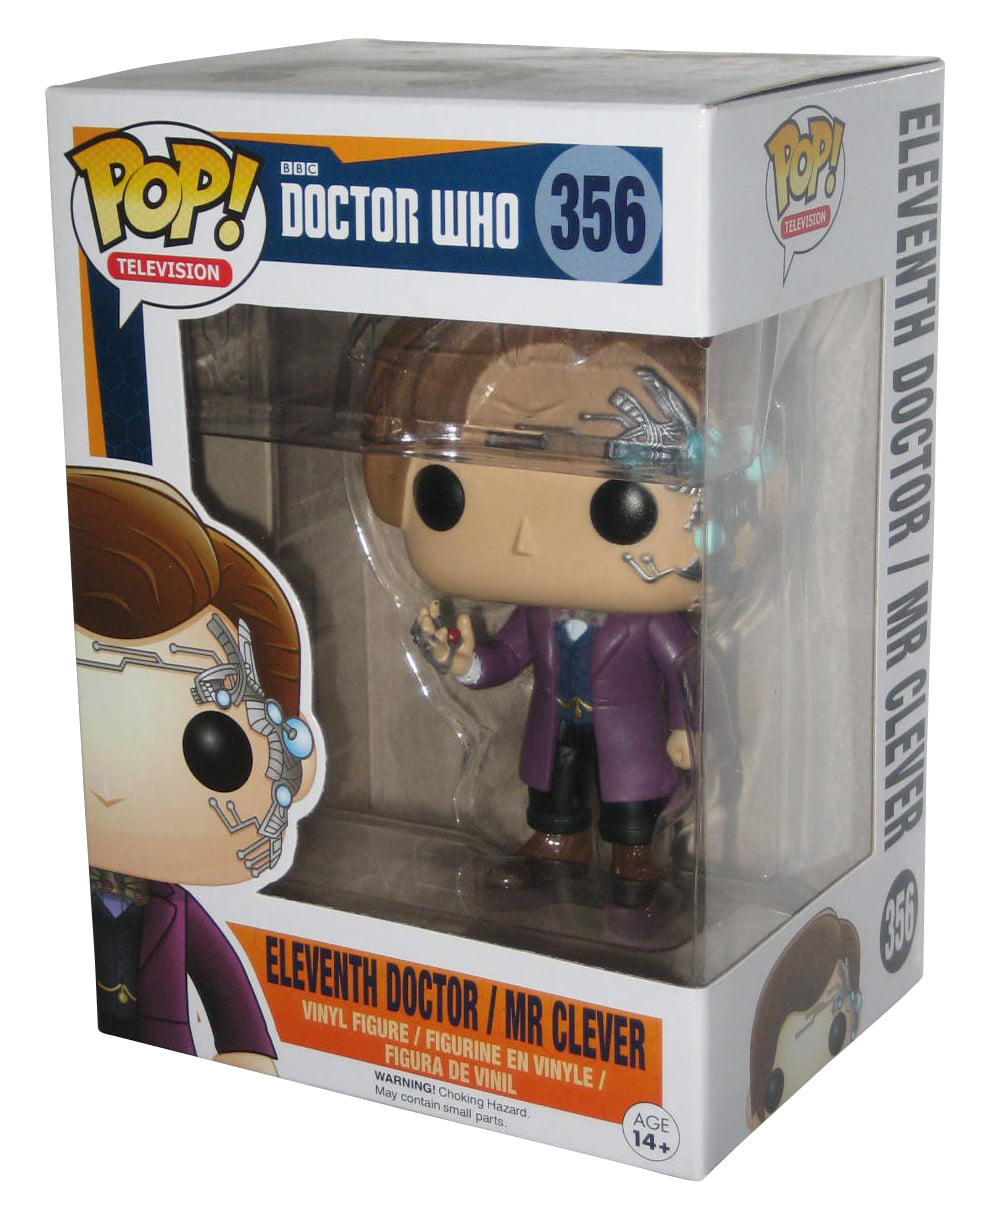 PTING Doctor Who 831 Funko Pop Vinyl New in Box *Summer Convention Exclusive*